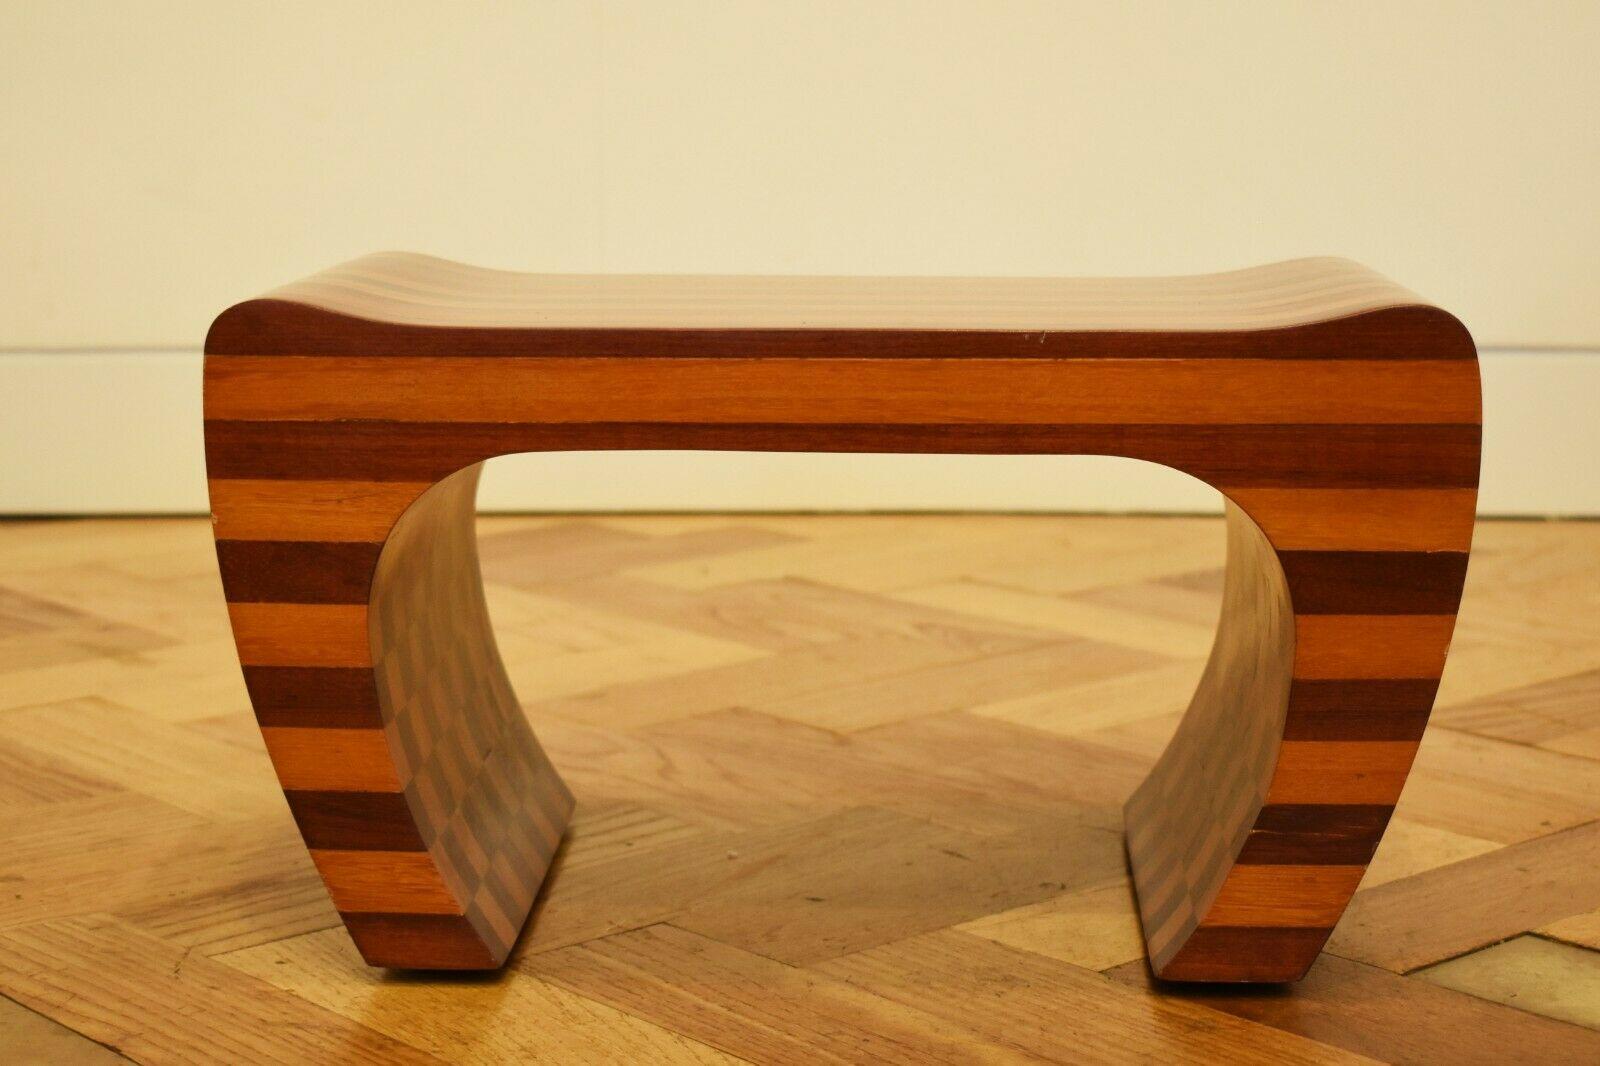 Modern Amazonian Checkered Foot Stool in Madeiras Wood, 1980's